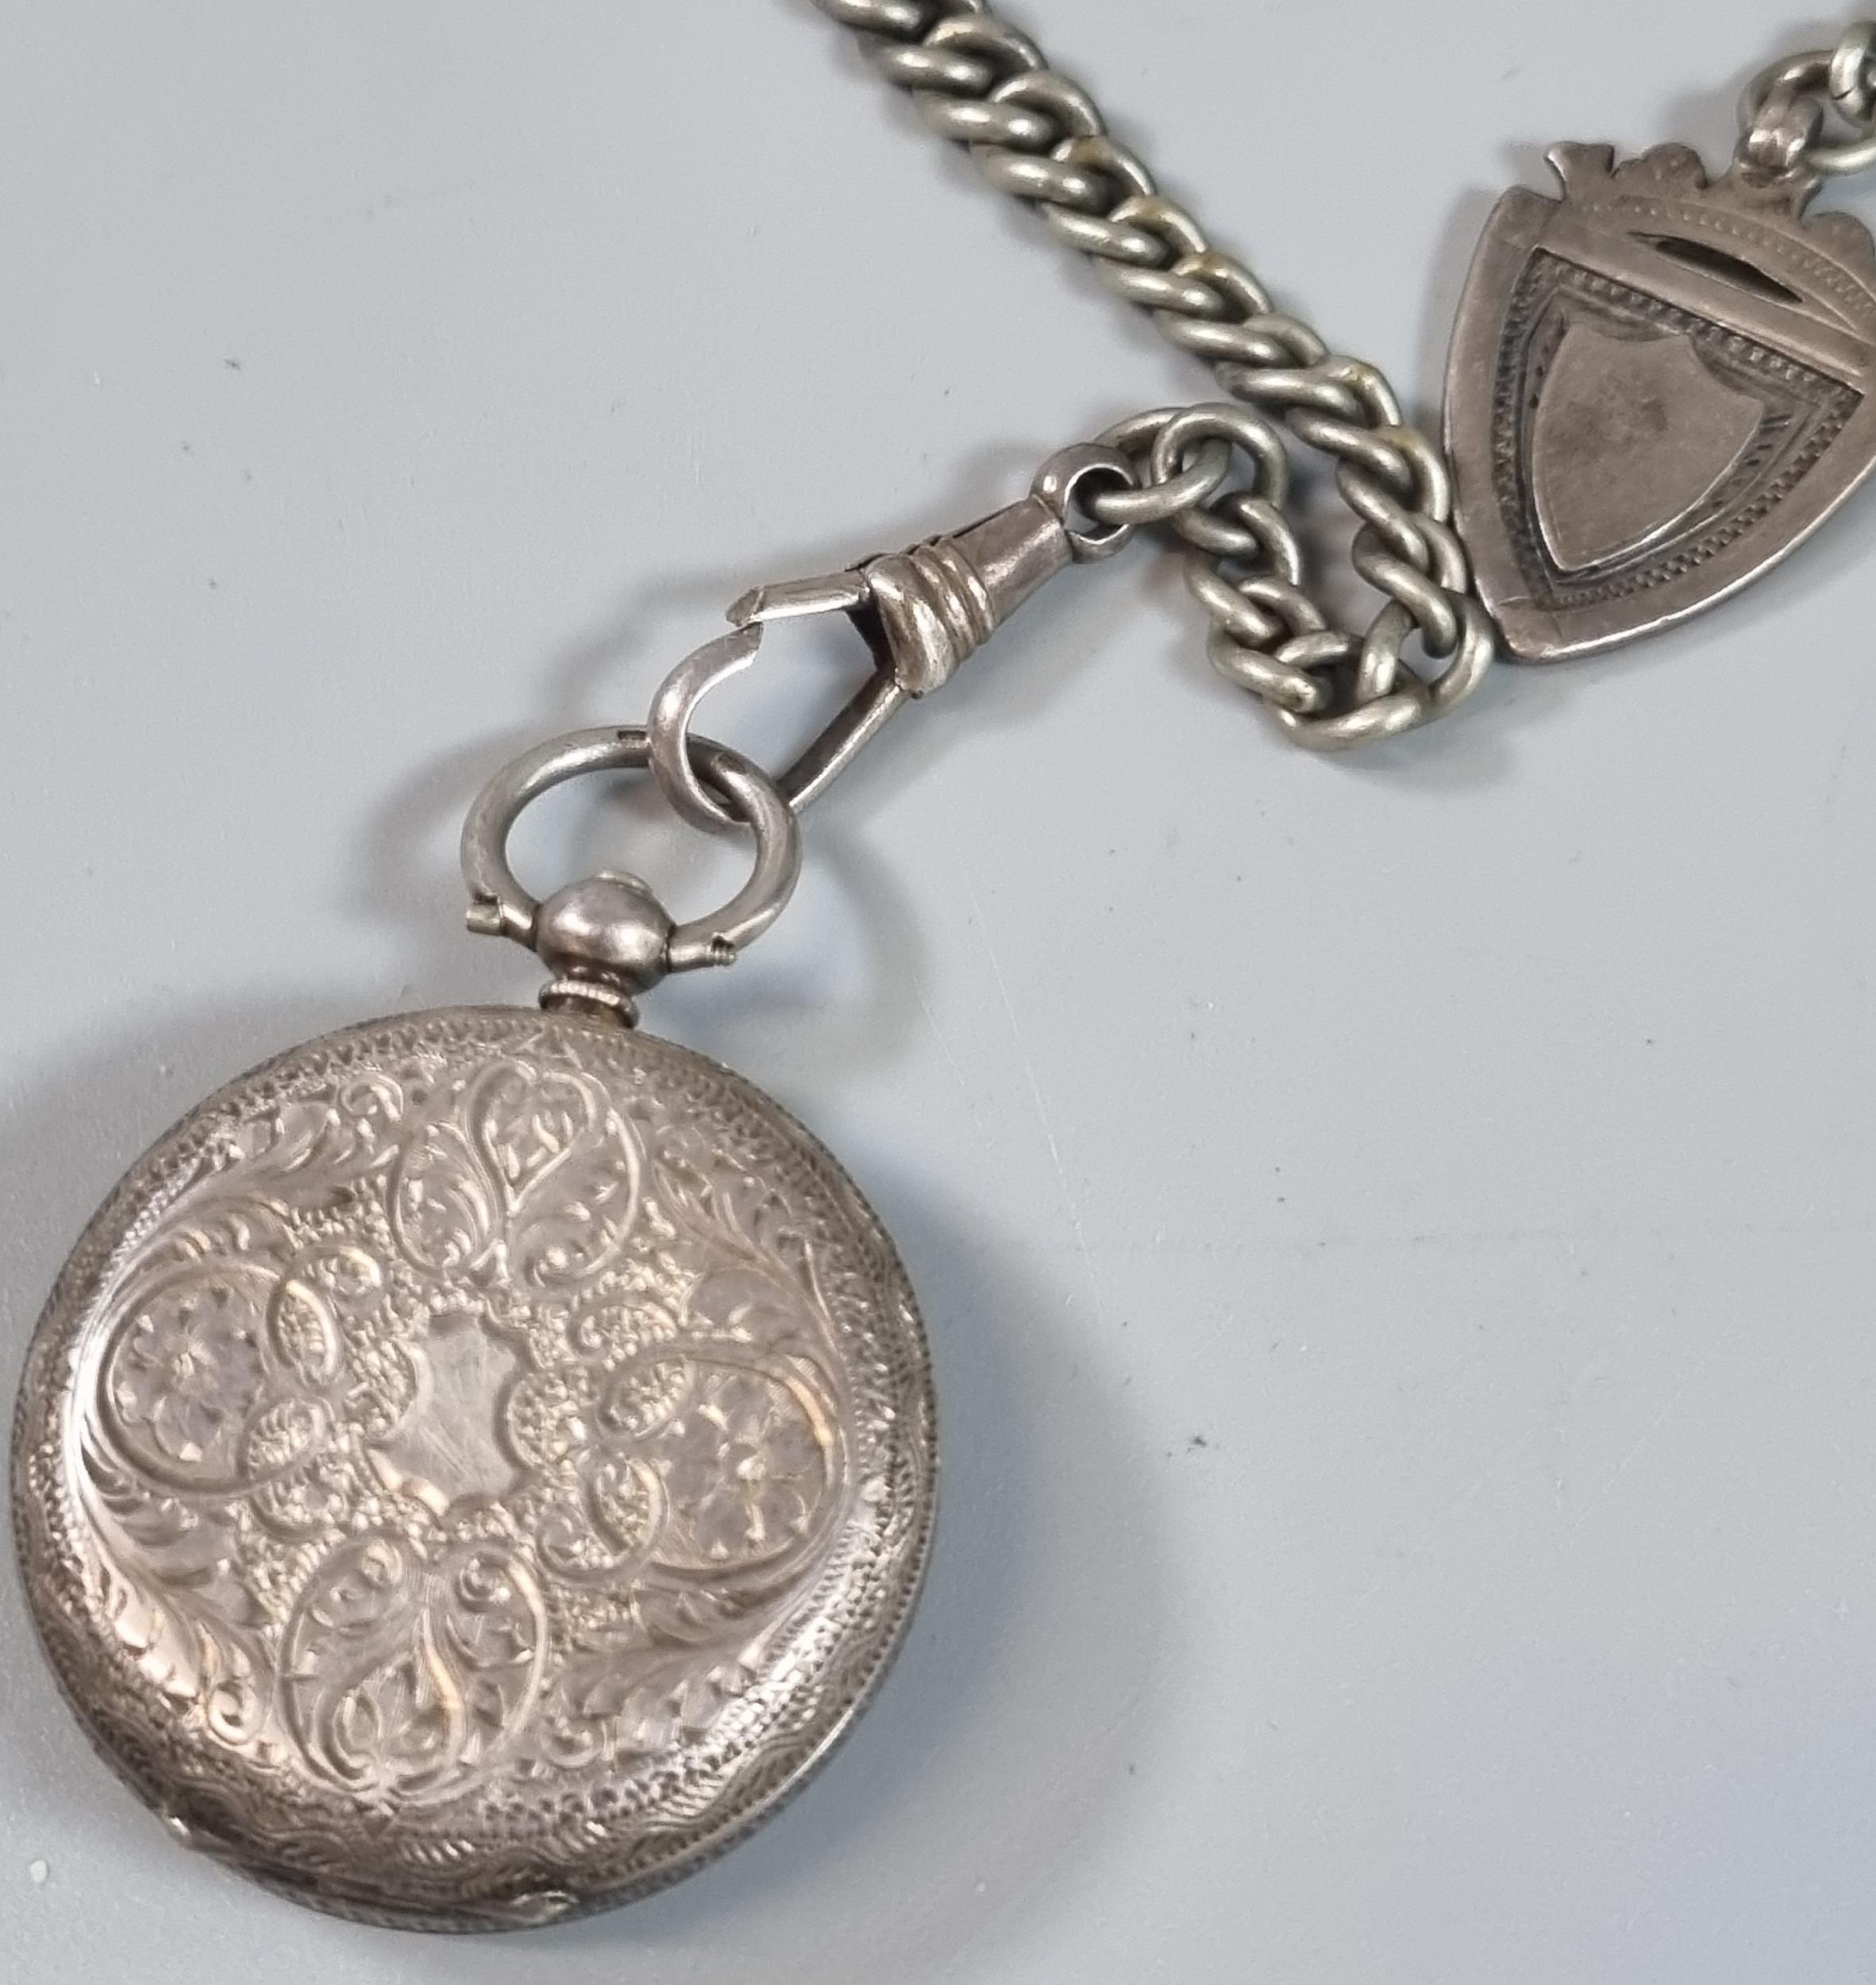 Silver and enamel ladies fancy fob watch with silver curb link Albert chain T bar and shield - Image 3 of 3